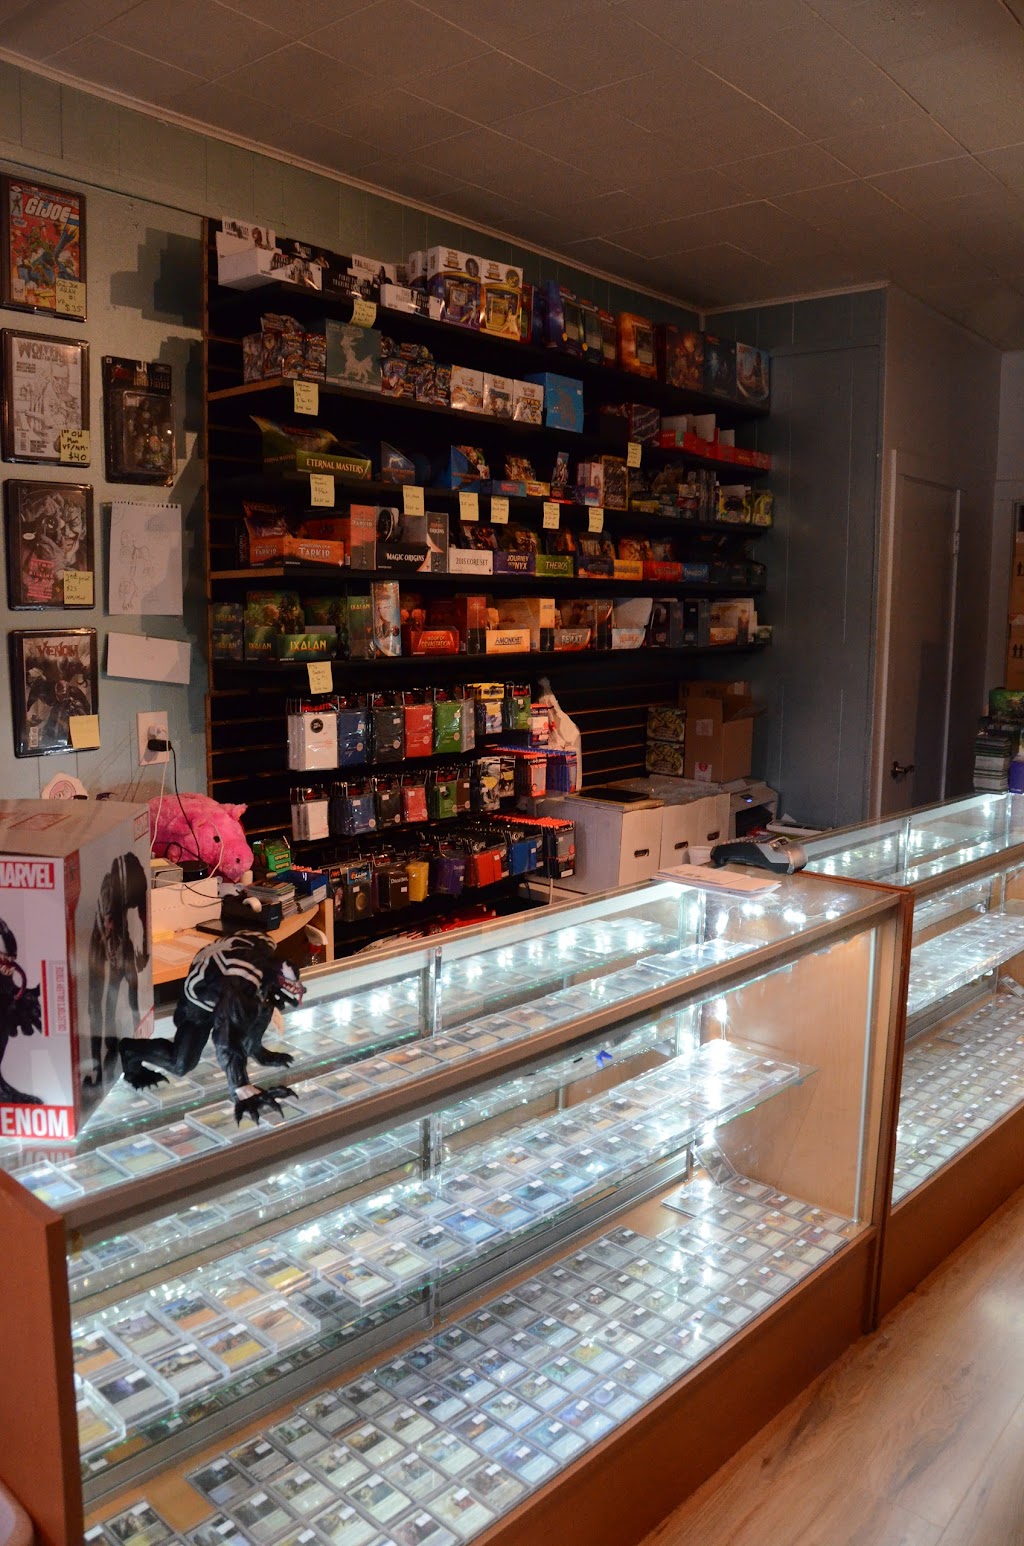 The H. E. Collectibles | 1212 N Green St, McHenry, IL 60050 | Phone: (815) 931-3343